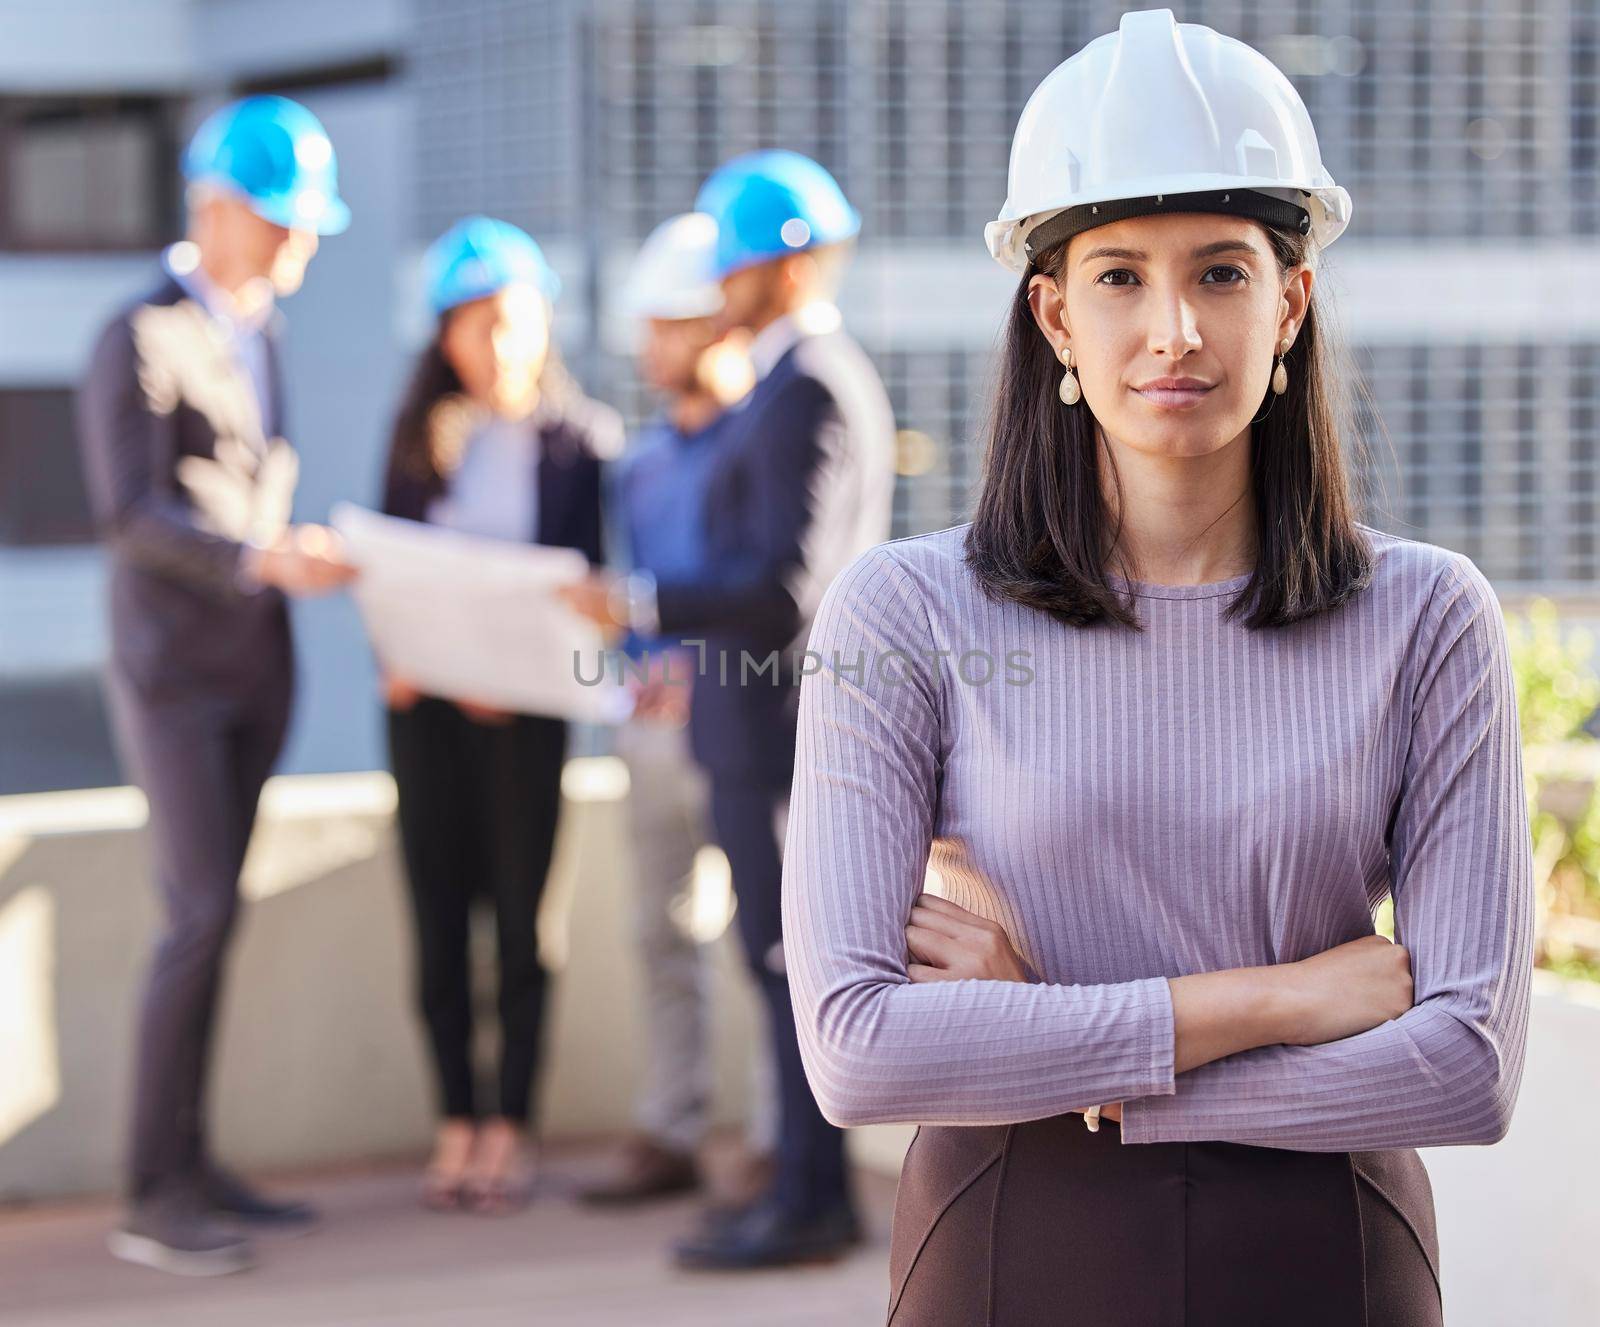 Shot of a young businesswoman standing with her arms folded and wearing a hardhat while her colleagues stand behind her.